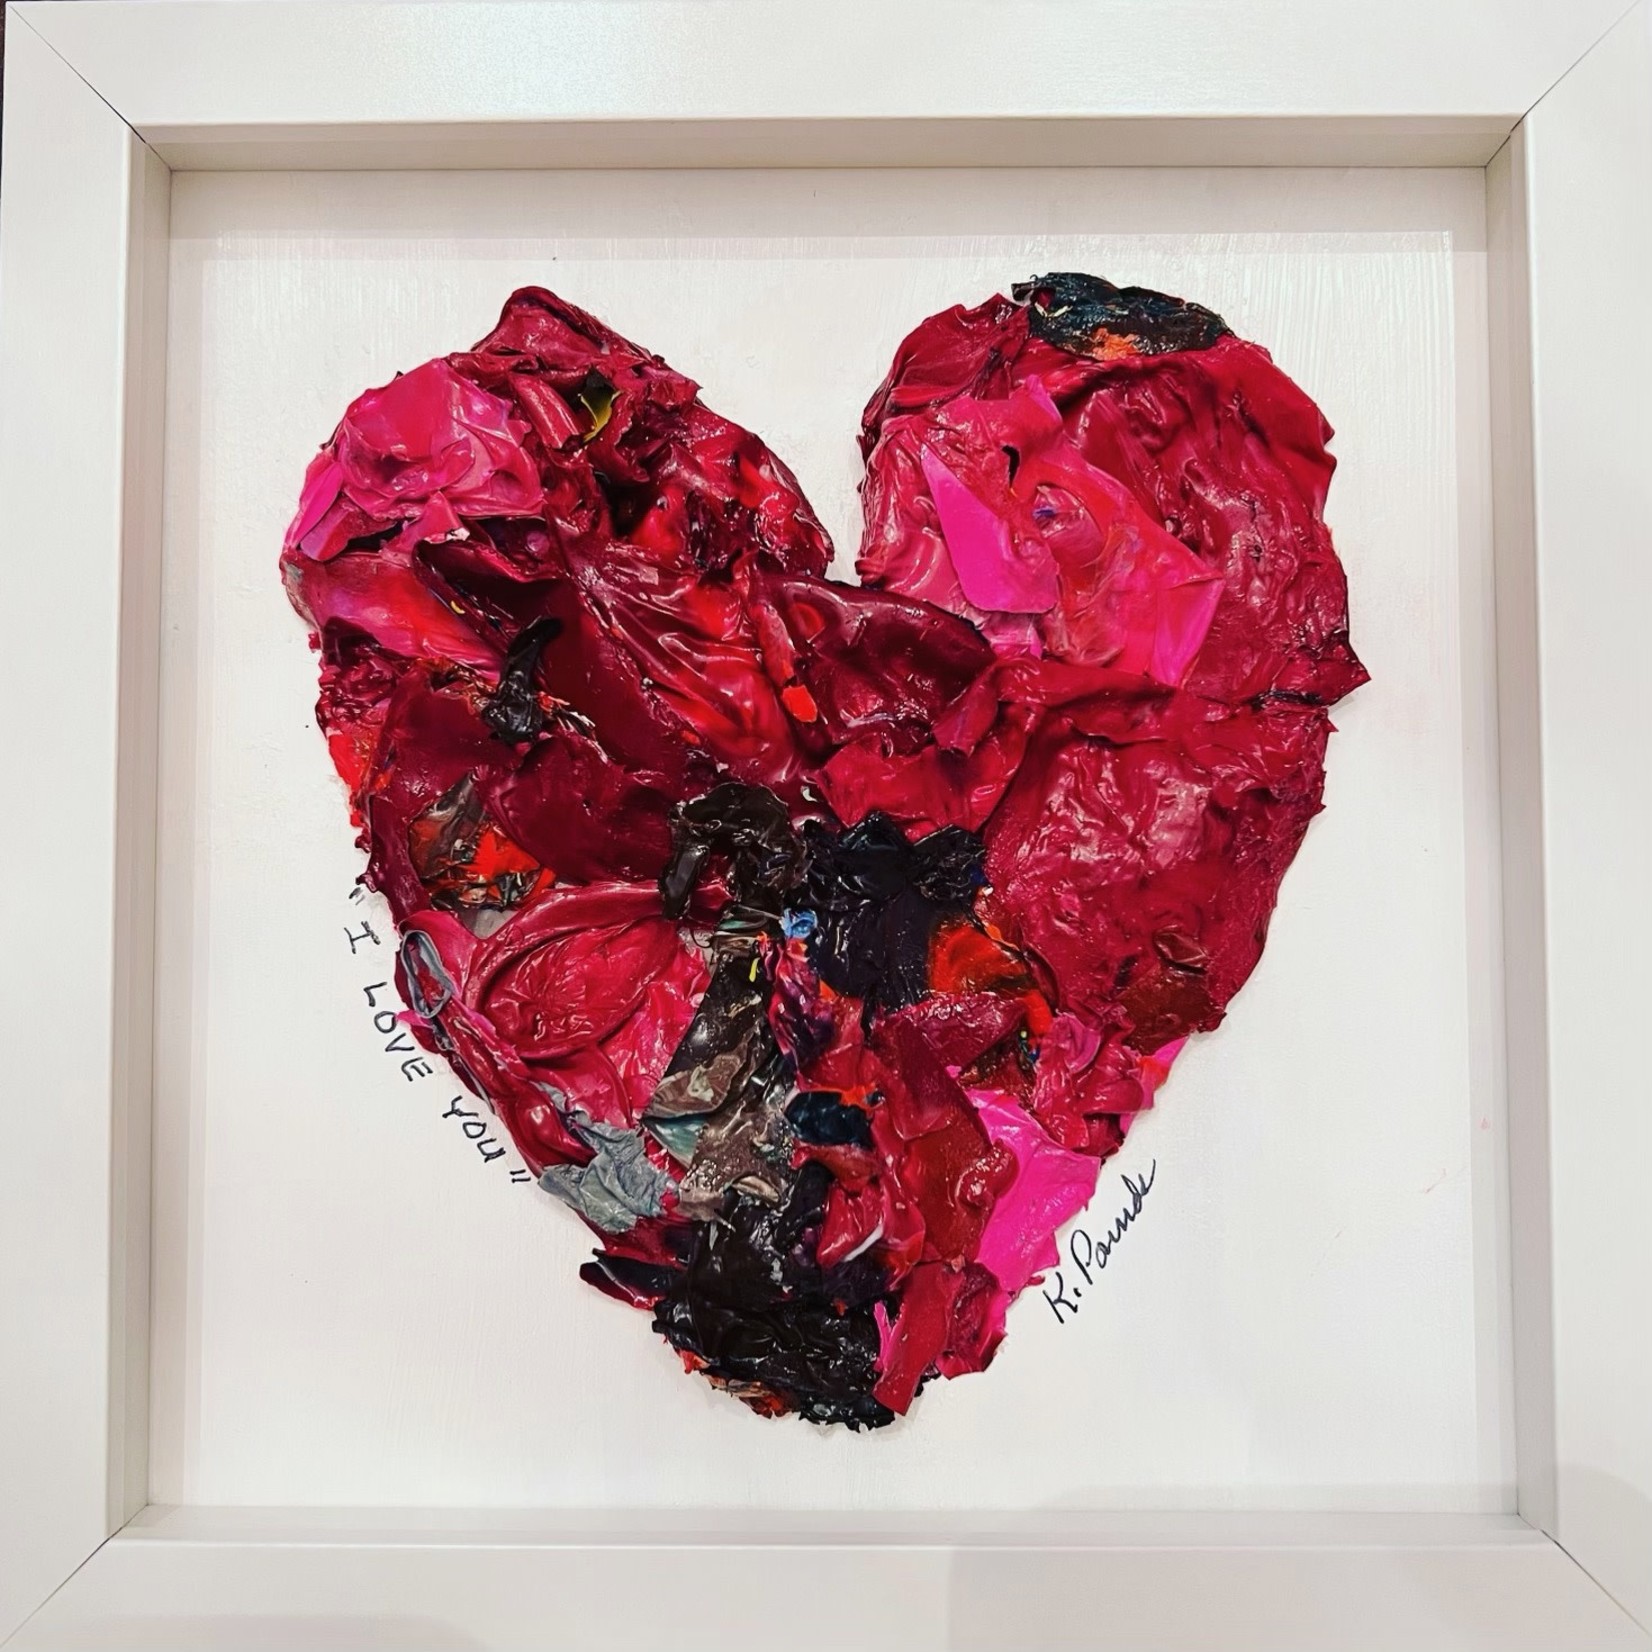 Kelly Pounds "I Love You" MM heart in shadow box frame, 9x9, KELP